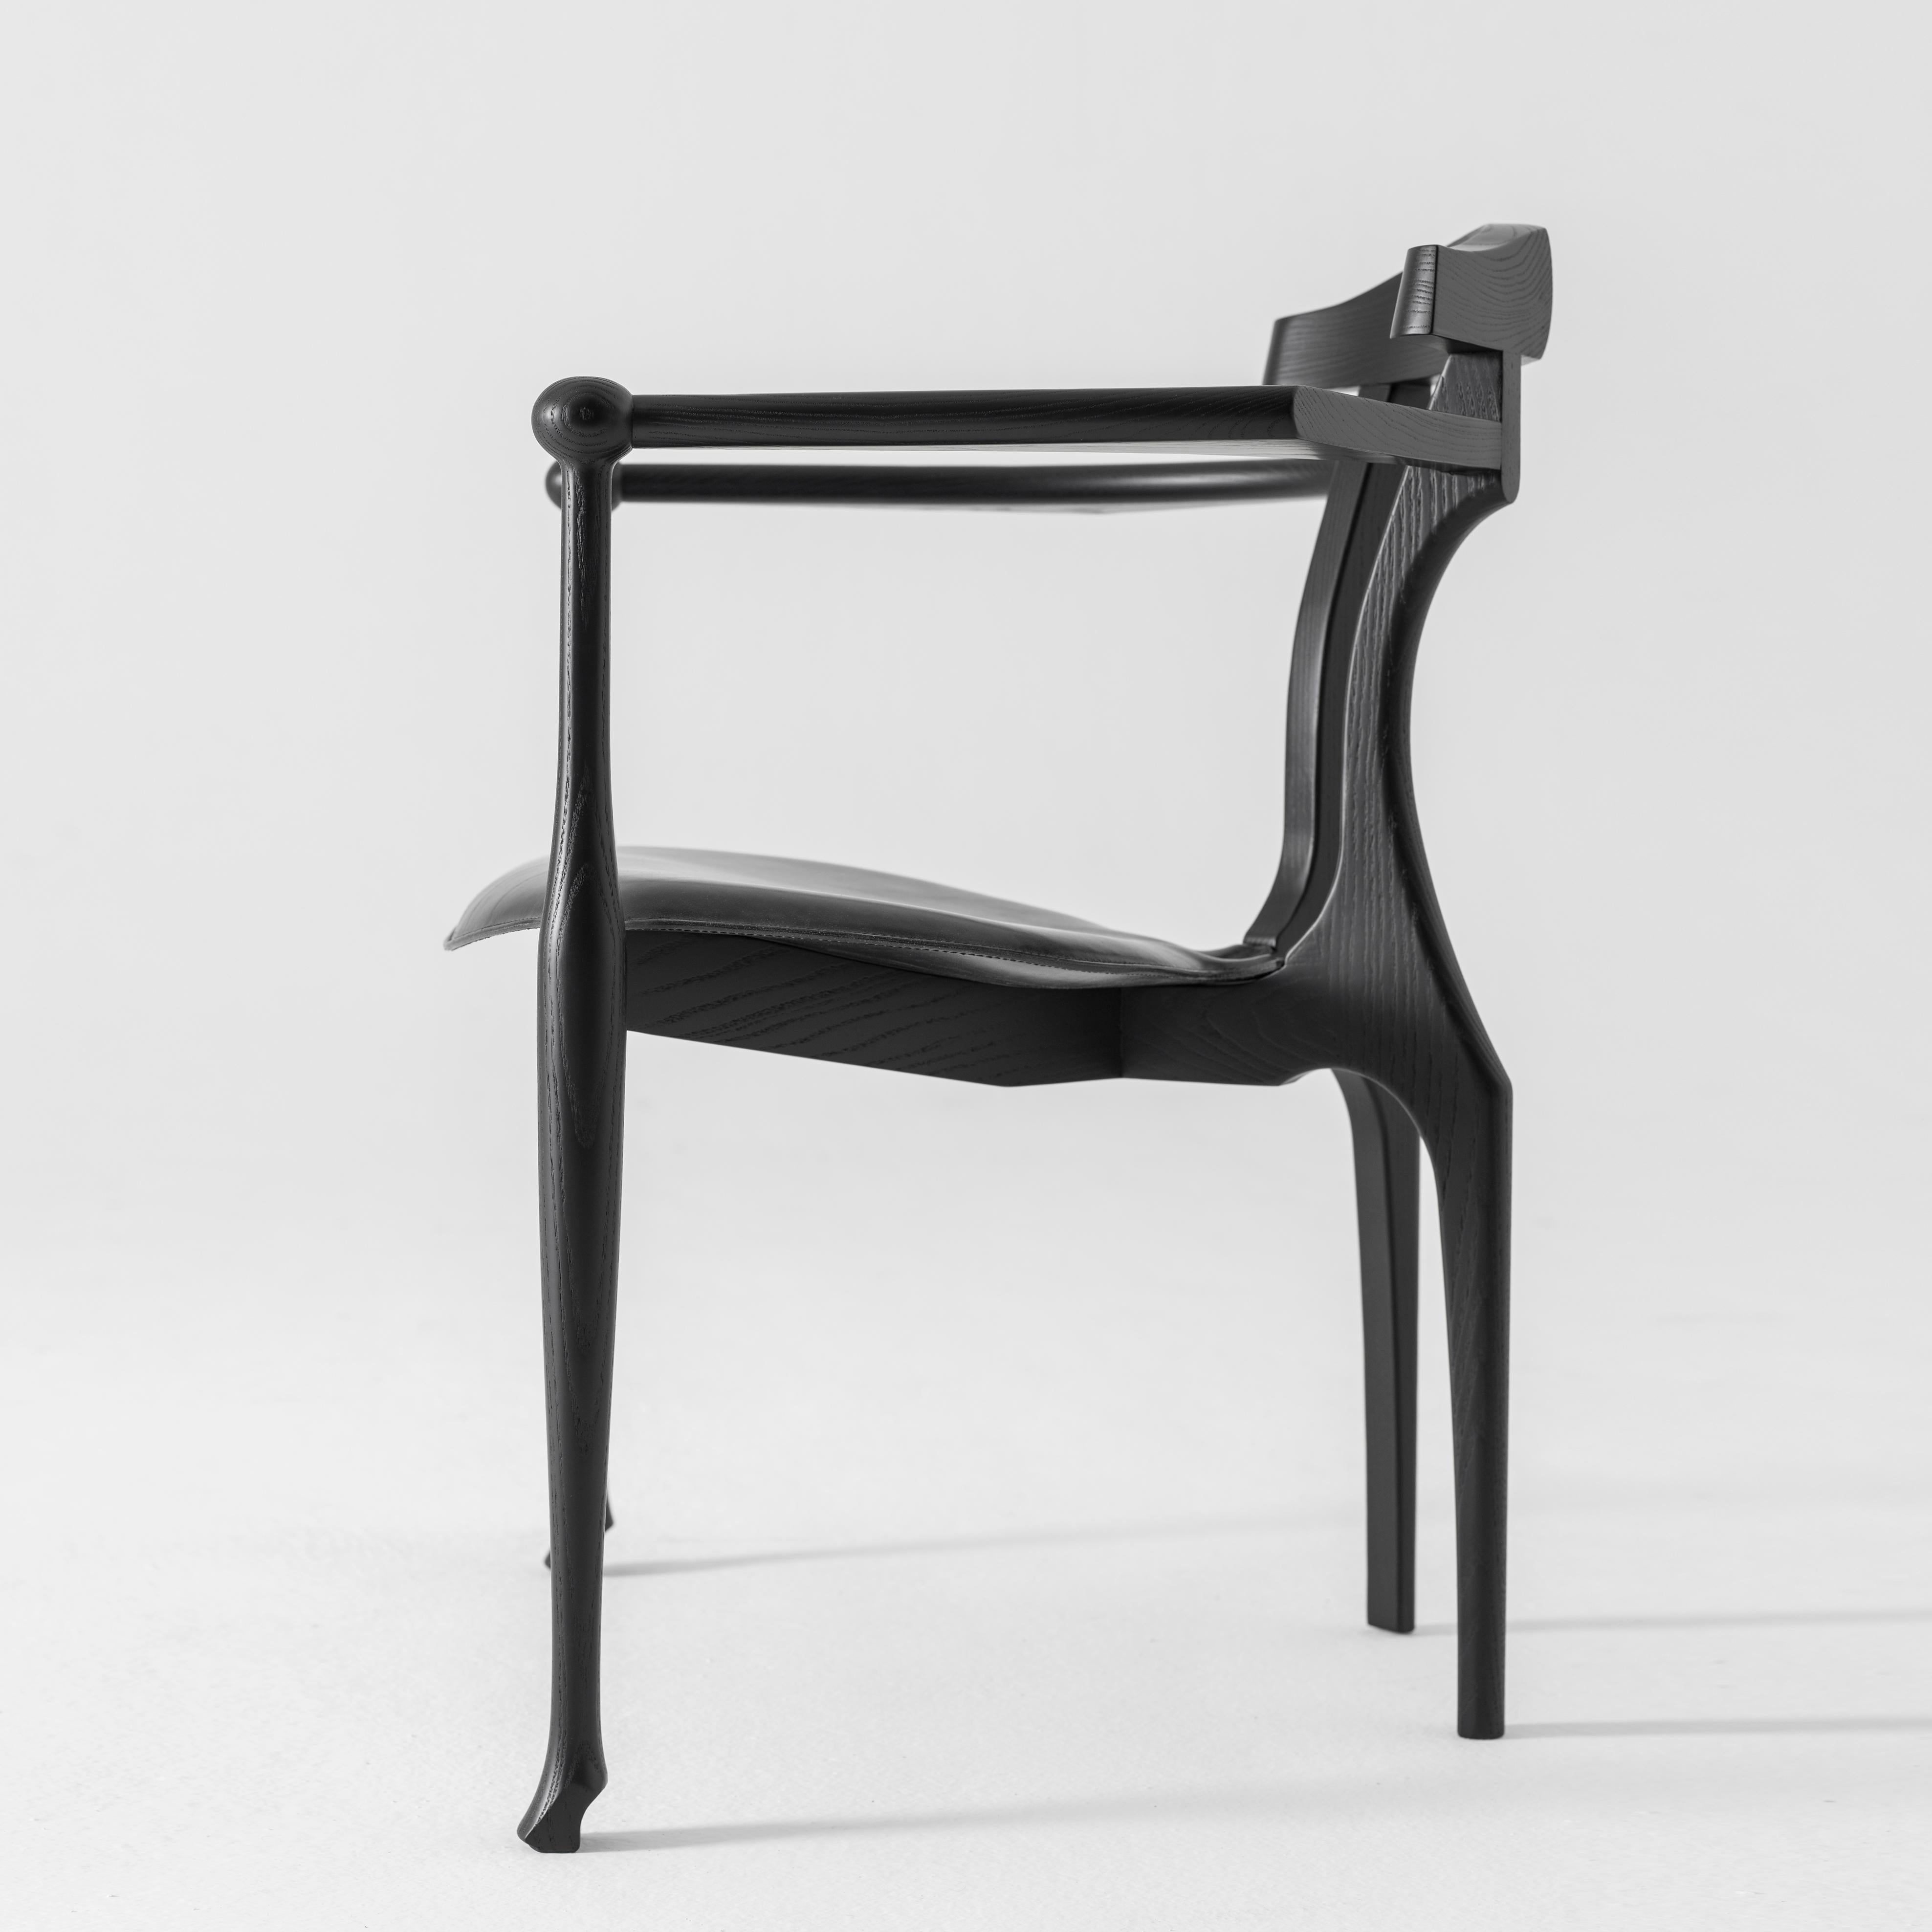 Gaulino easy chair designed by Oscar Tusquets manufactured by BD barcelona Design.

Solid ash lacquered in black with seat in black hide.


Gaulino chair which, designed in 1987, was selected for the Industrial Design Prize and Adi-Fad in1989 and in